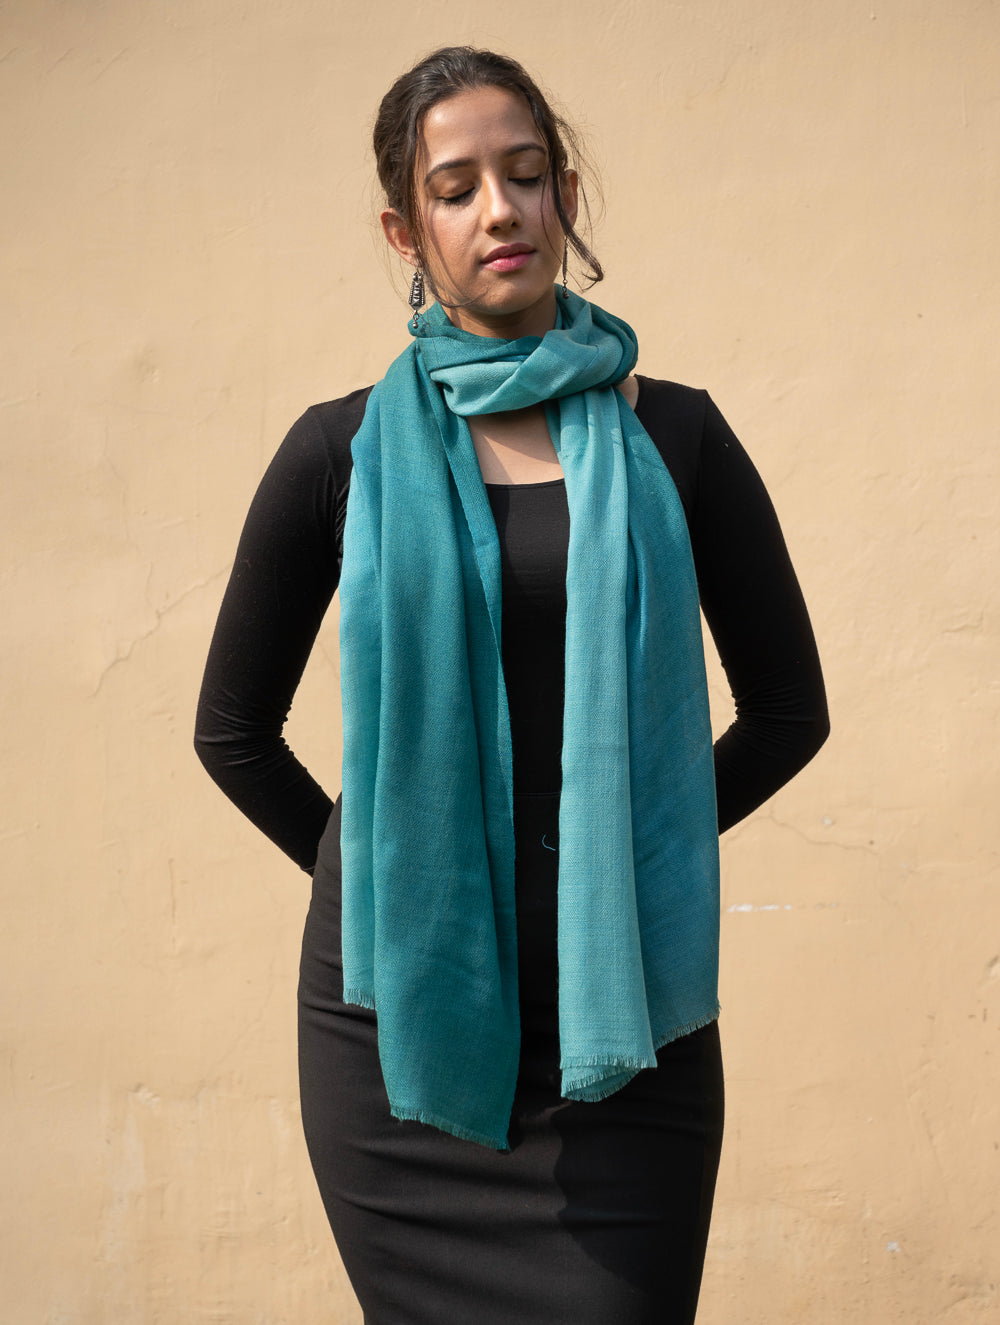 Load image into Gallery viewer, Fine, Soft Kashmiri Ombre Wool Stole - Shaded Turquoise 